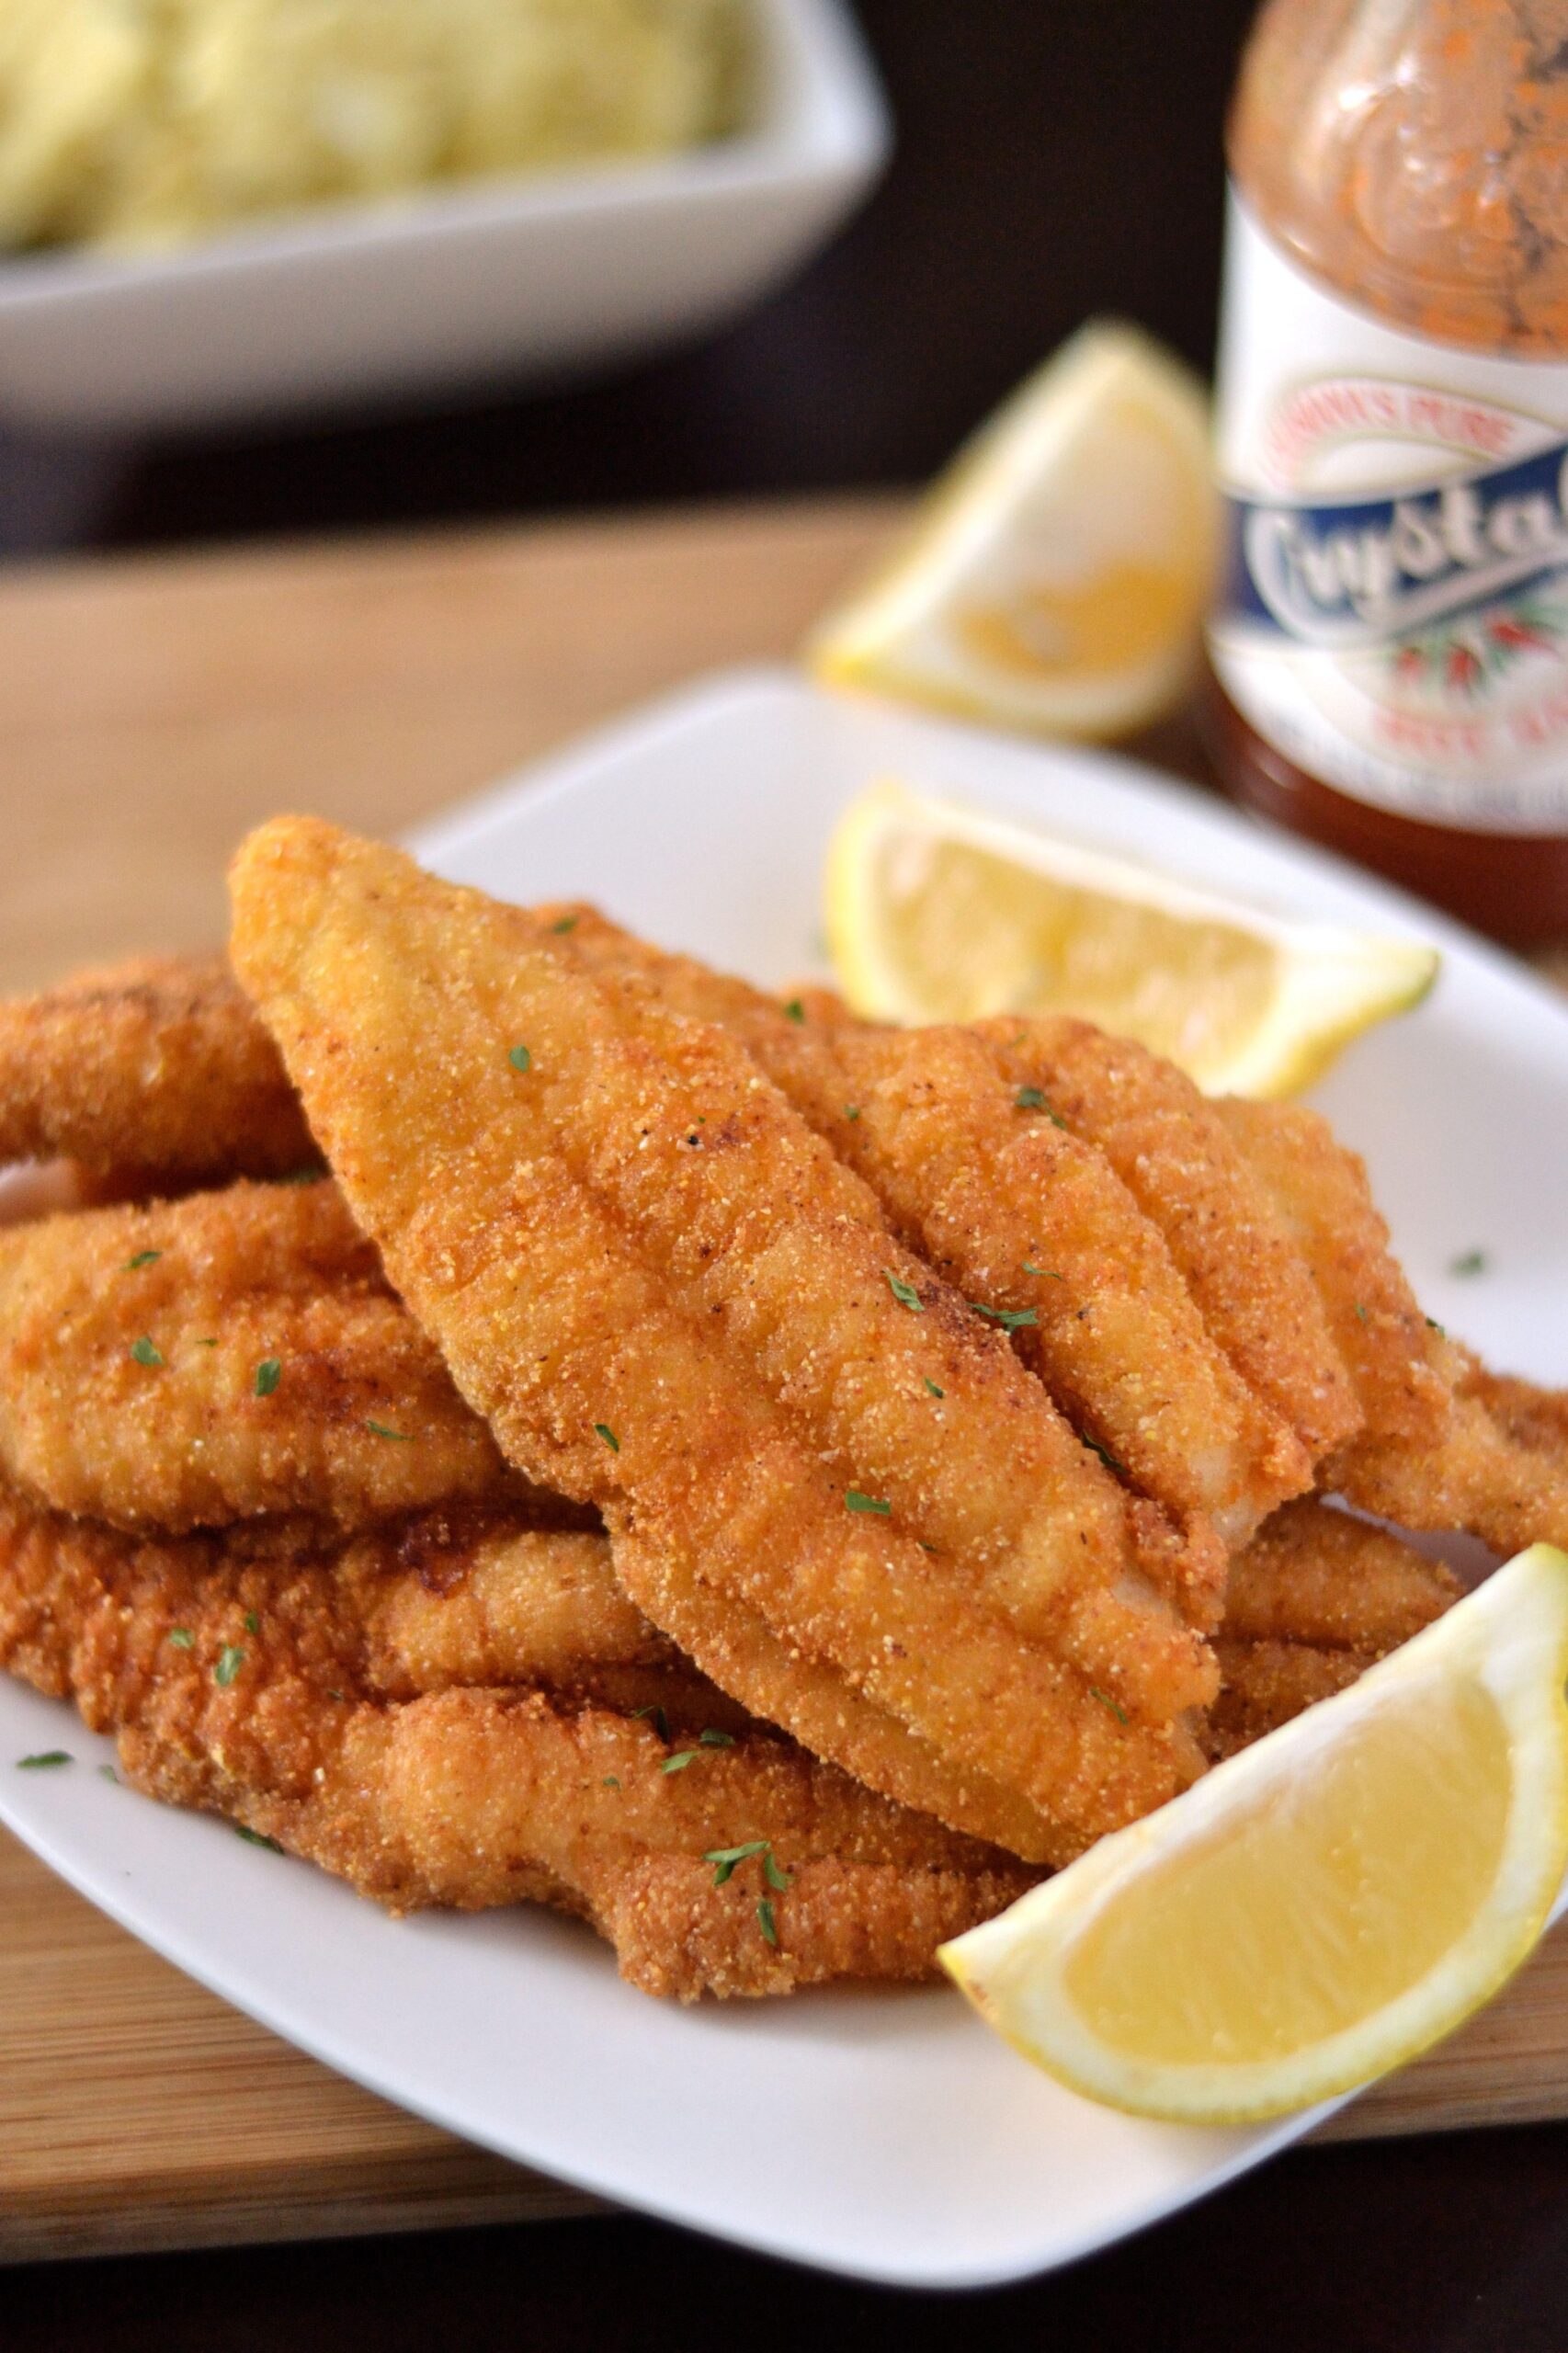  Flour, cornmeal, and spices come together to create the perfect breading for our catfish.